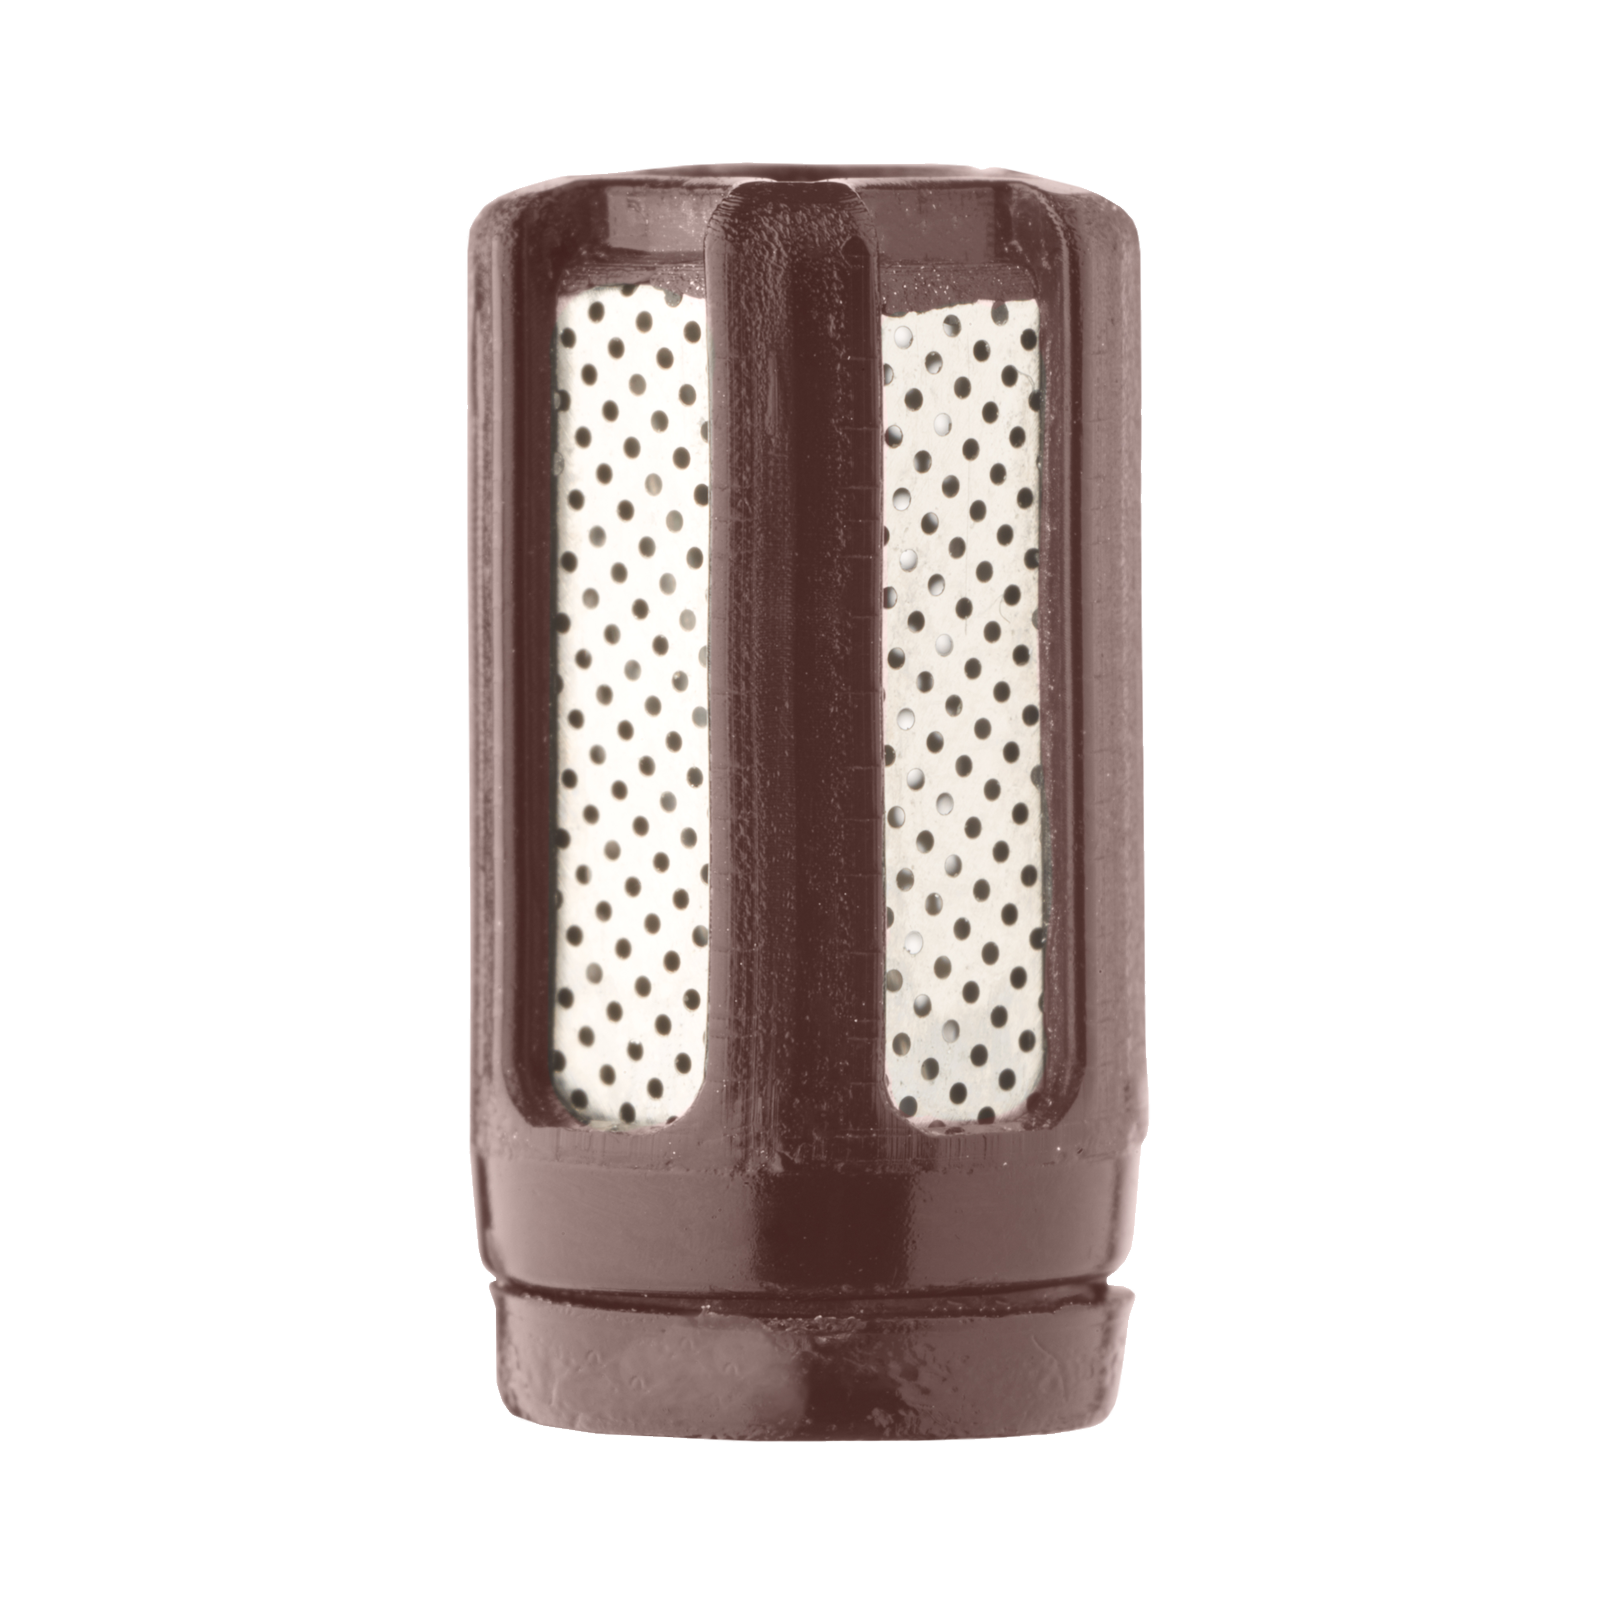 WM81 (5 Pack) - Cocoa - Wiremesh caps for MicroLite microphones - Hero